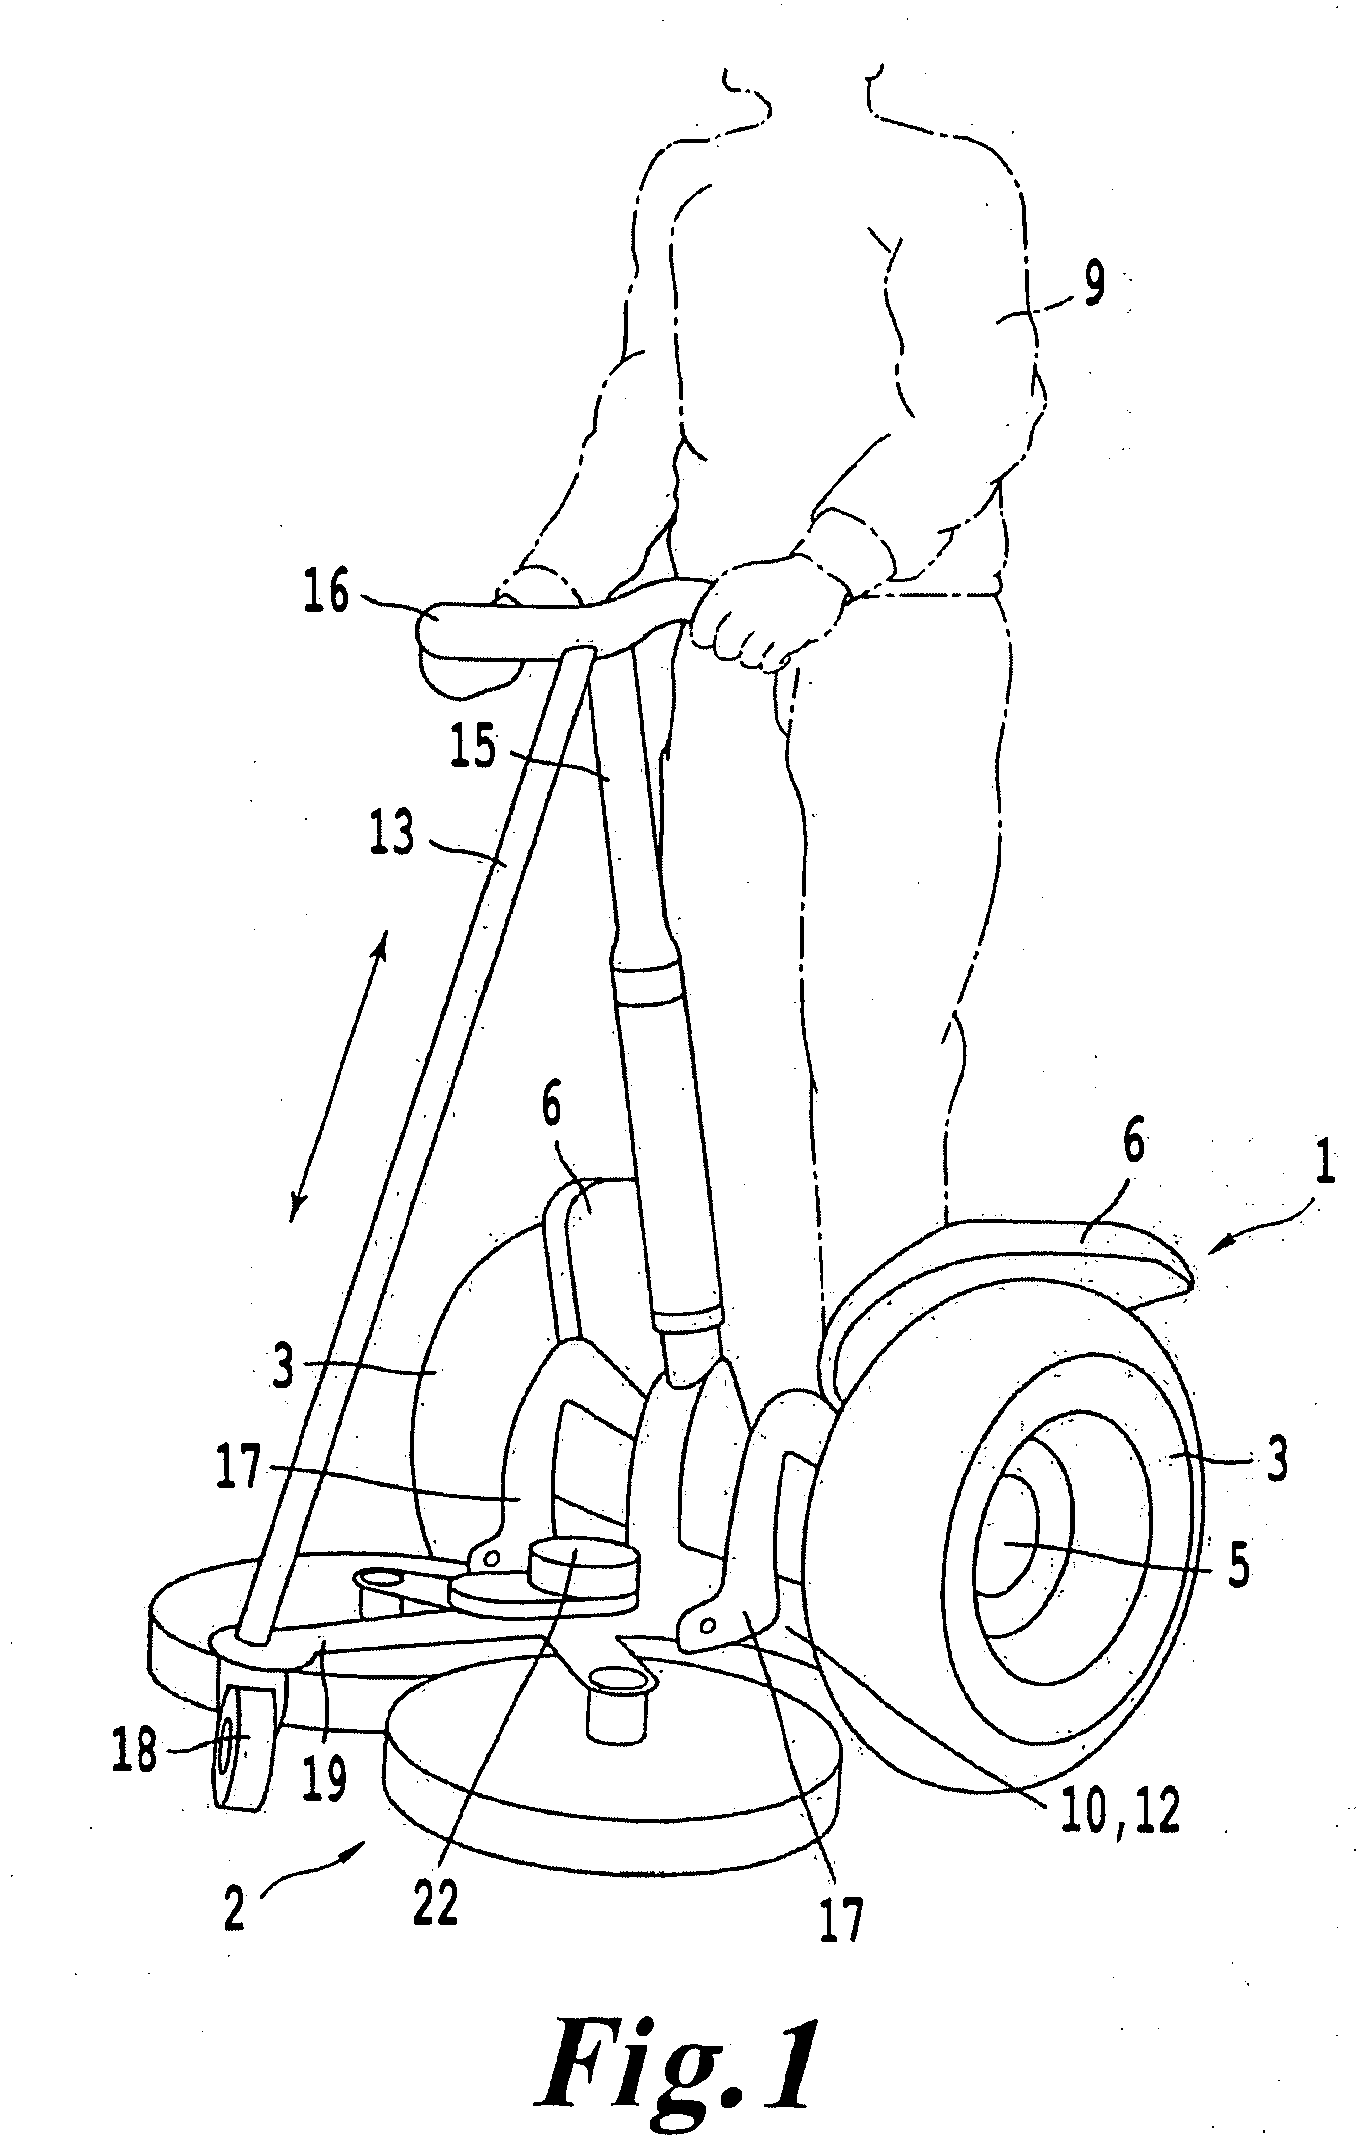 Single-axle vehicle with a platform and/or a seat for a driver